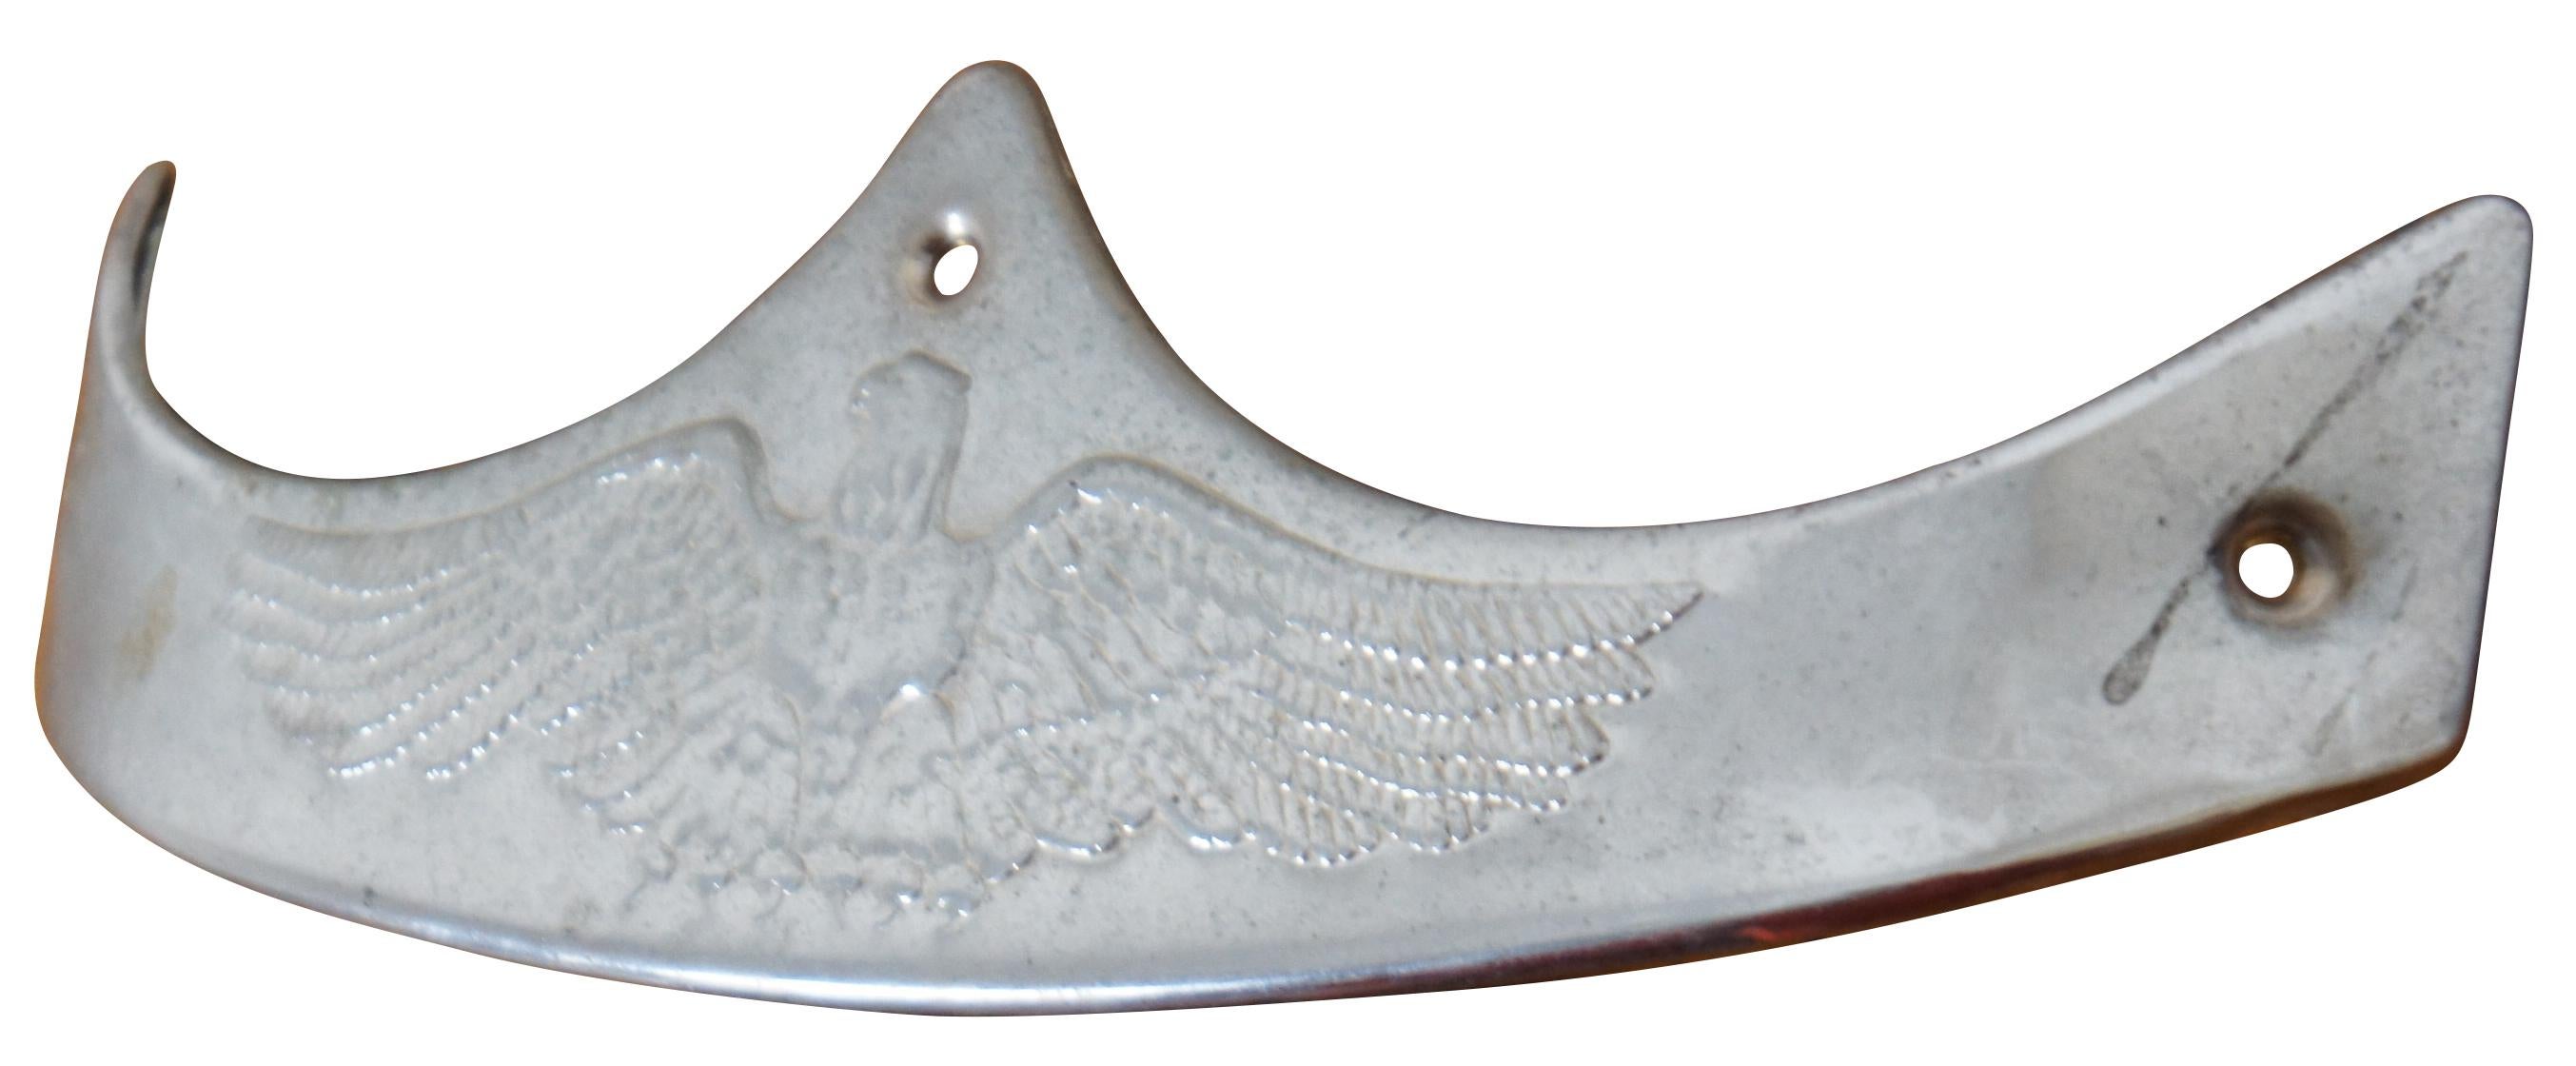 Vintage Harley-Davidson Panhead motorcycle chrome fender tip emblazoned with the shape of a bald eagle in flight, for 1934-1984 rear fenders and 1934-1948 front fenders. Originally purchased in the 1980s from the Pennsylvania warehouse where a cache